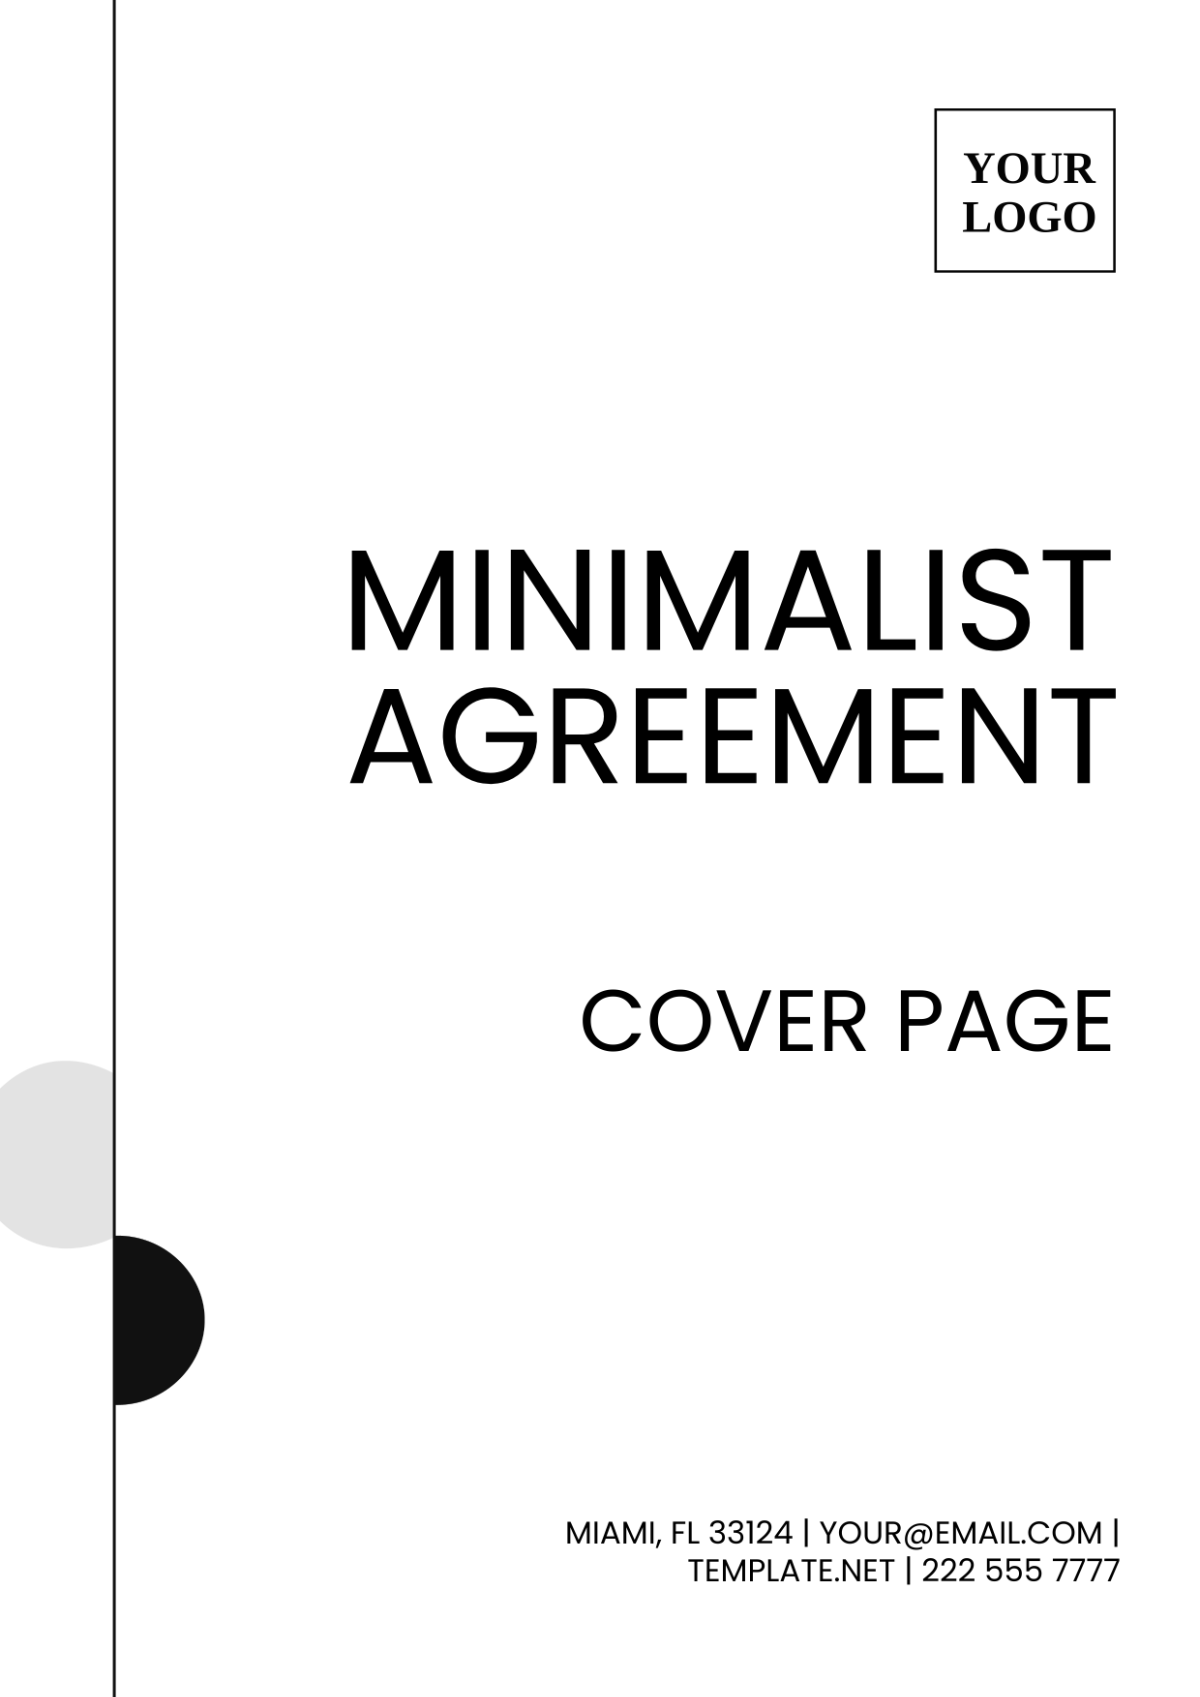 Minimalist Agreement Cover Page